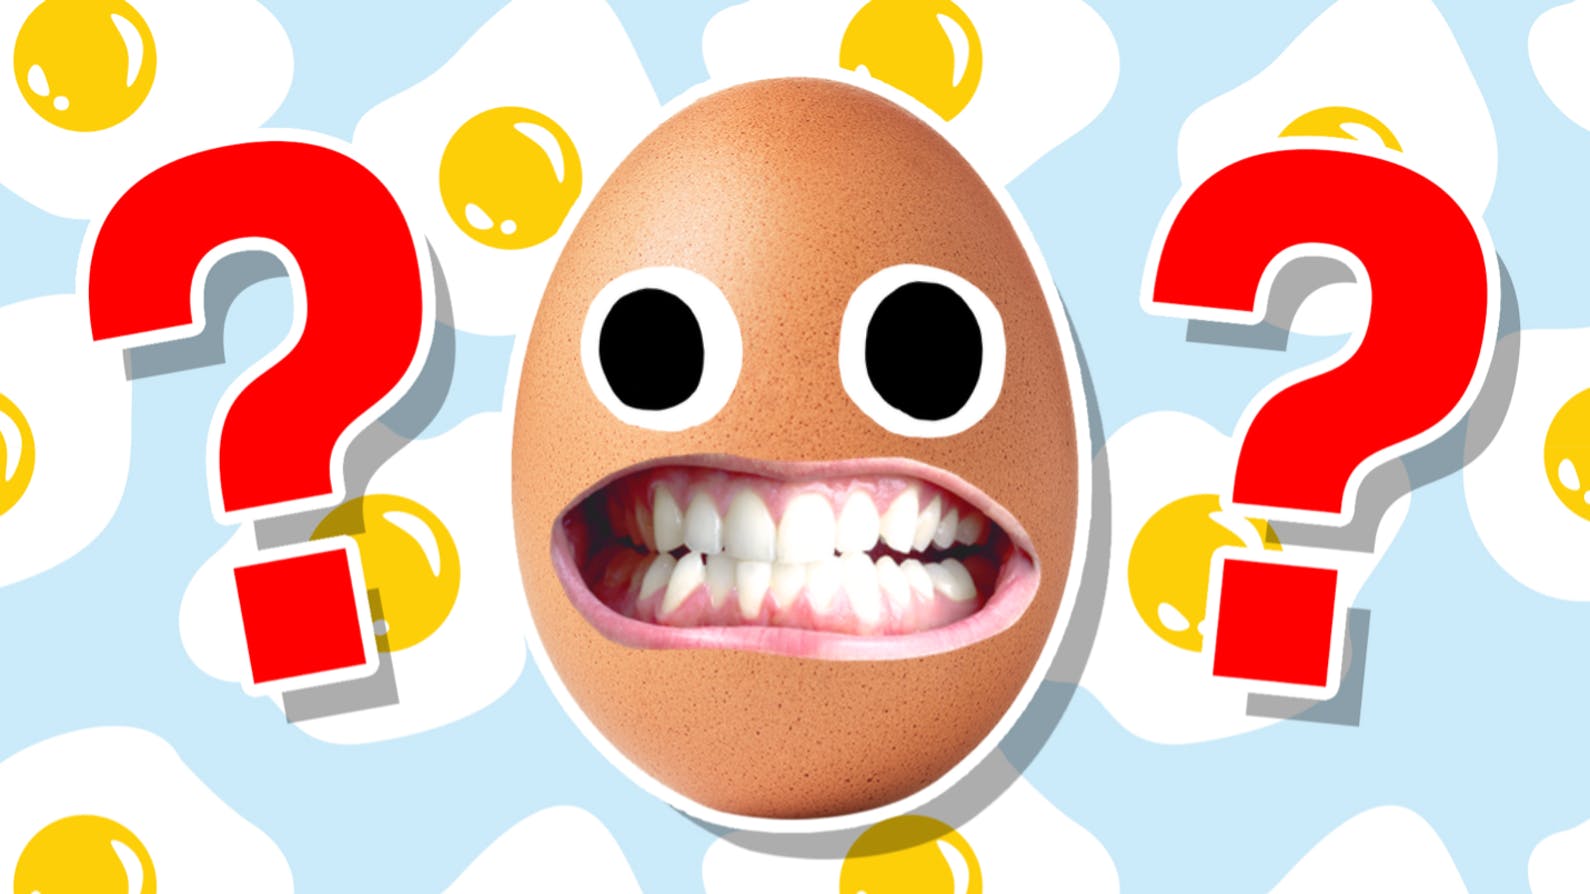 The Ultimate Egg Quiz